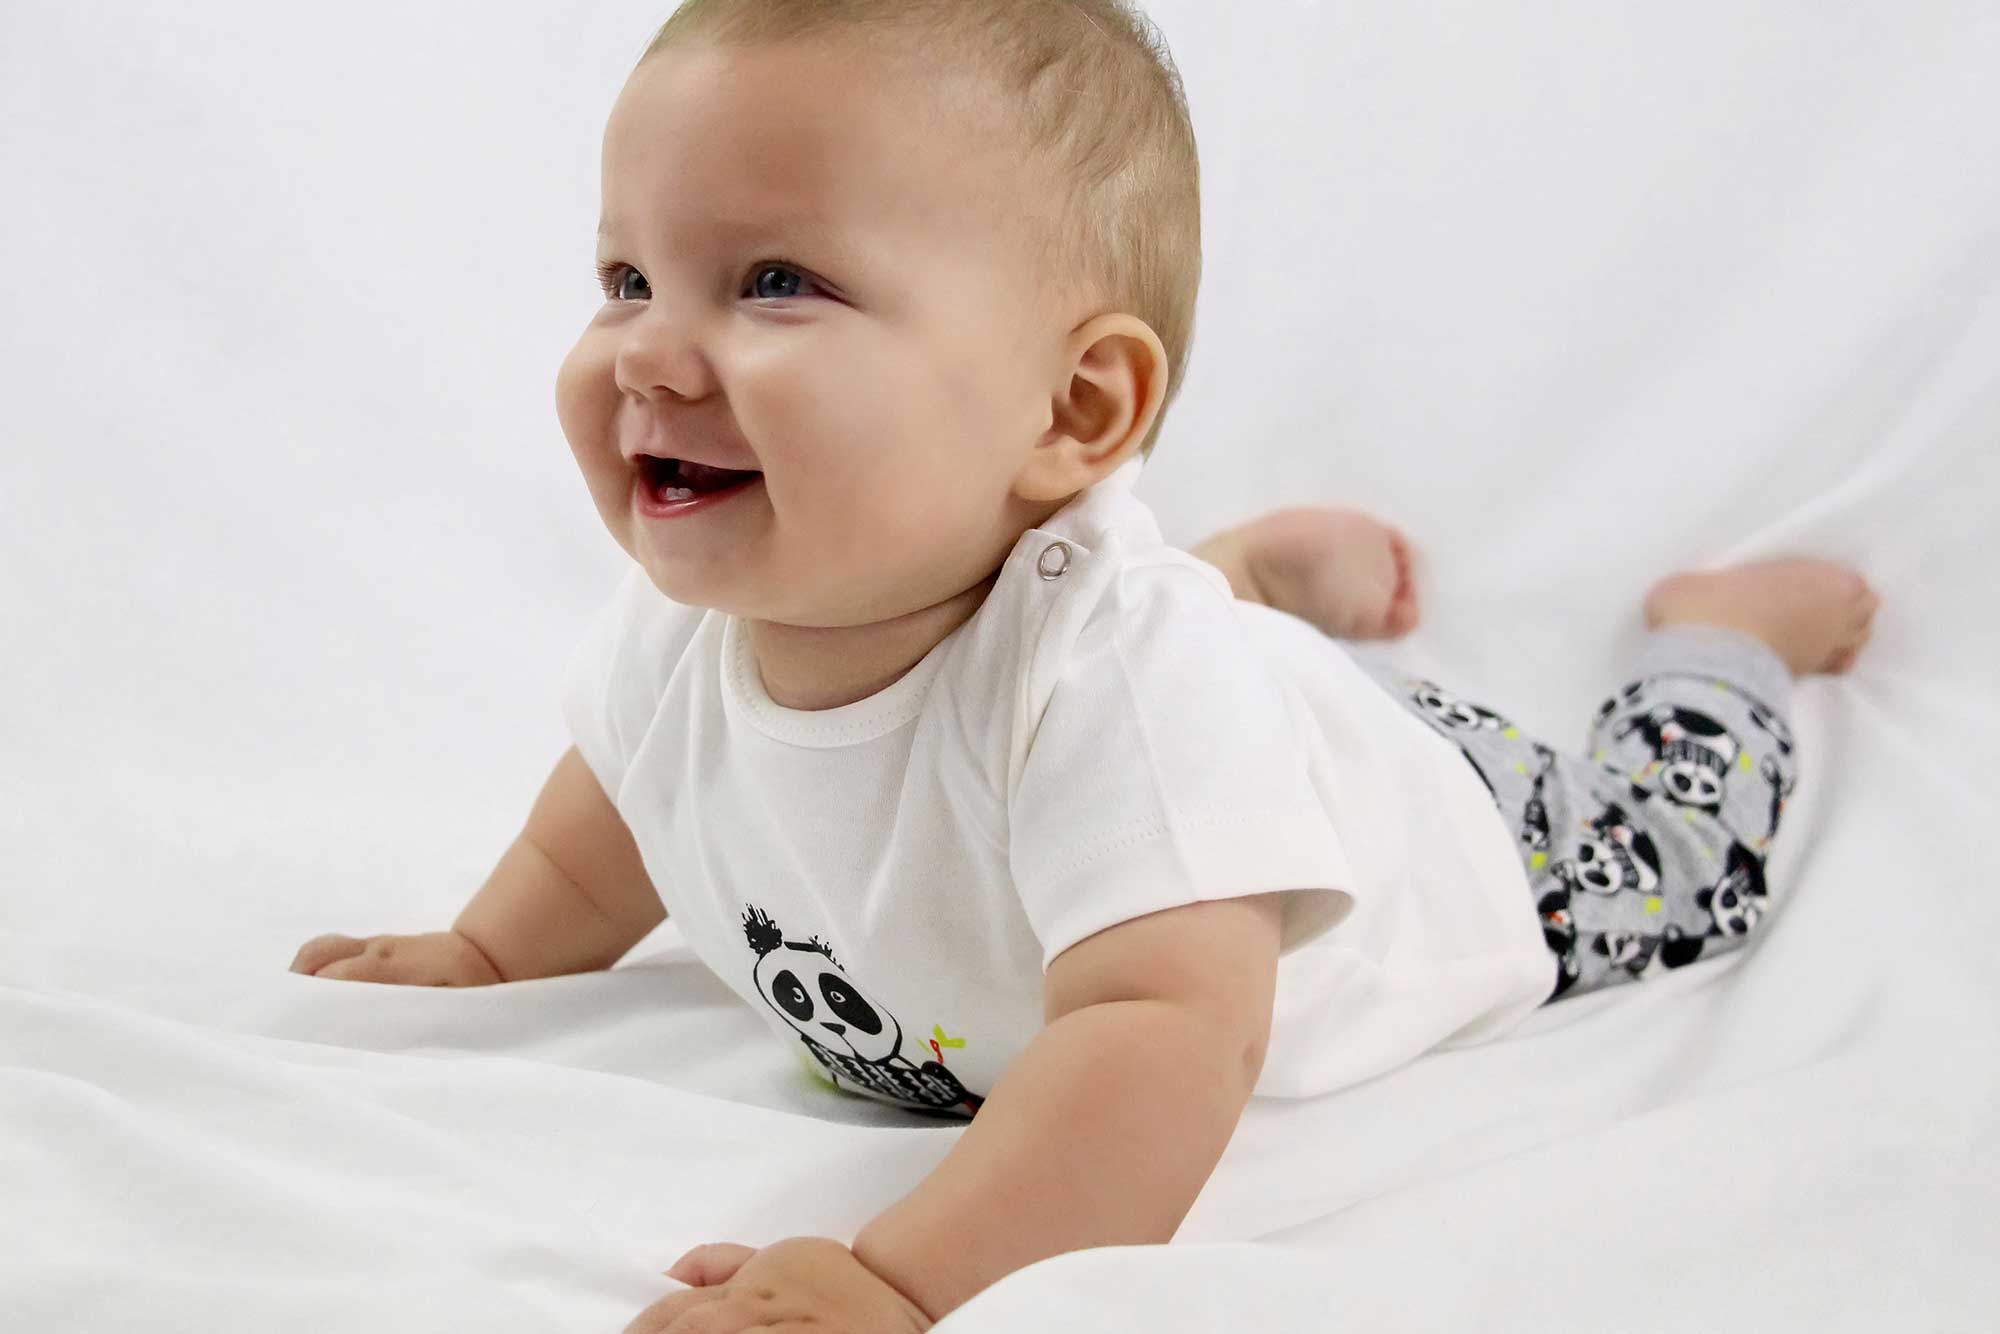 organic baby clothes, Inexpensive organic baby clothes, Organic cotton clothes babies, Affordable organic baby clothes, Cheap organic baby clothes, organic baby clothes uk, organic cotton baby clothes, inexpensive organic baby clothes, organic newborn